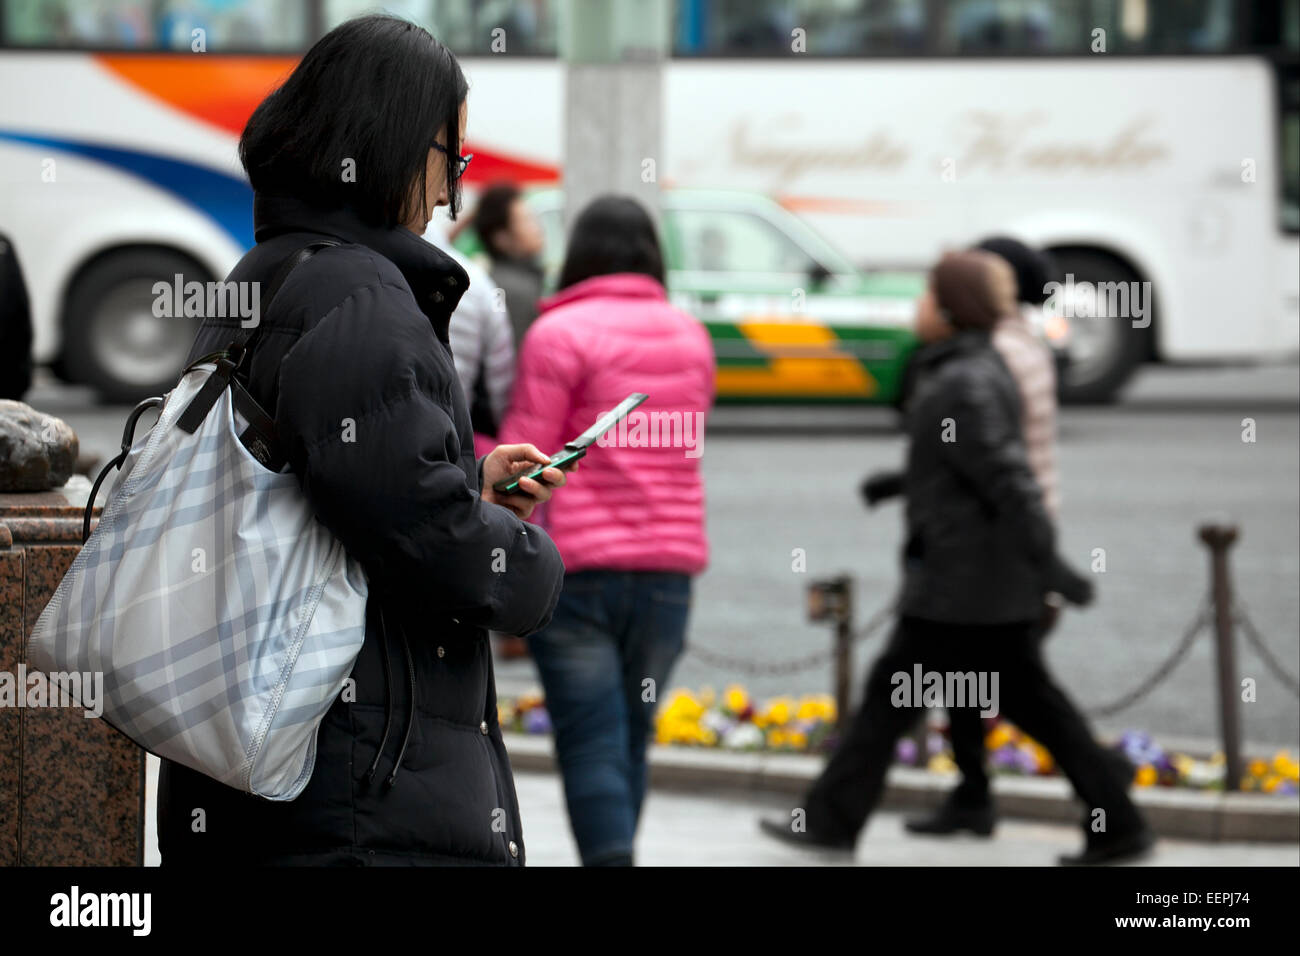 Tokyo, Japan. 17th Feb, 2015. A woman uses a flip-phone on the street in Ginza shopping district on February 17, 2015, Tokyo, Japan. According to data from MM Research Institute Flip-phones sales increased for first time in seven years in Japan in 2014. In Japan flip-phones monthly rates are cheaper in comparison to smartphones which are more expensive than in other countries. Flip-phones sales rose 5.7% in 2014 whilst smartphone sales declined 5.3%. Credit:  Rodrigo Reyes Marin/AFLO/Alamy Live News Stock Photo